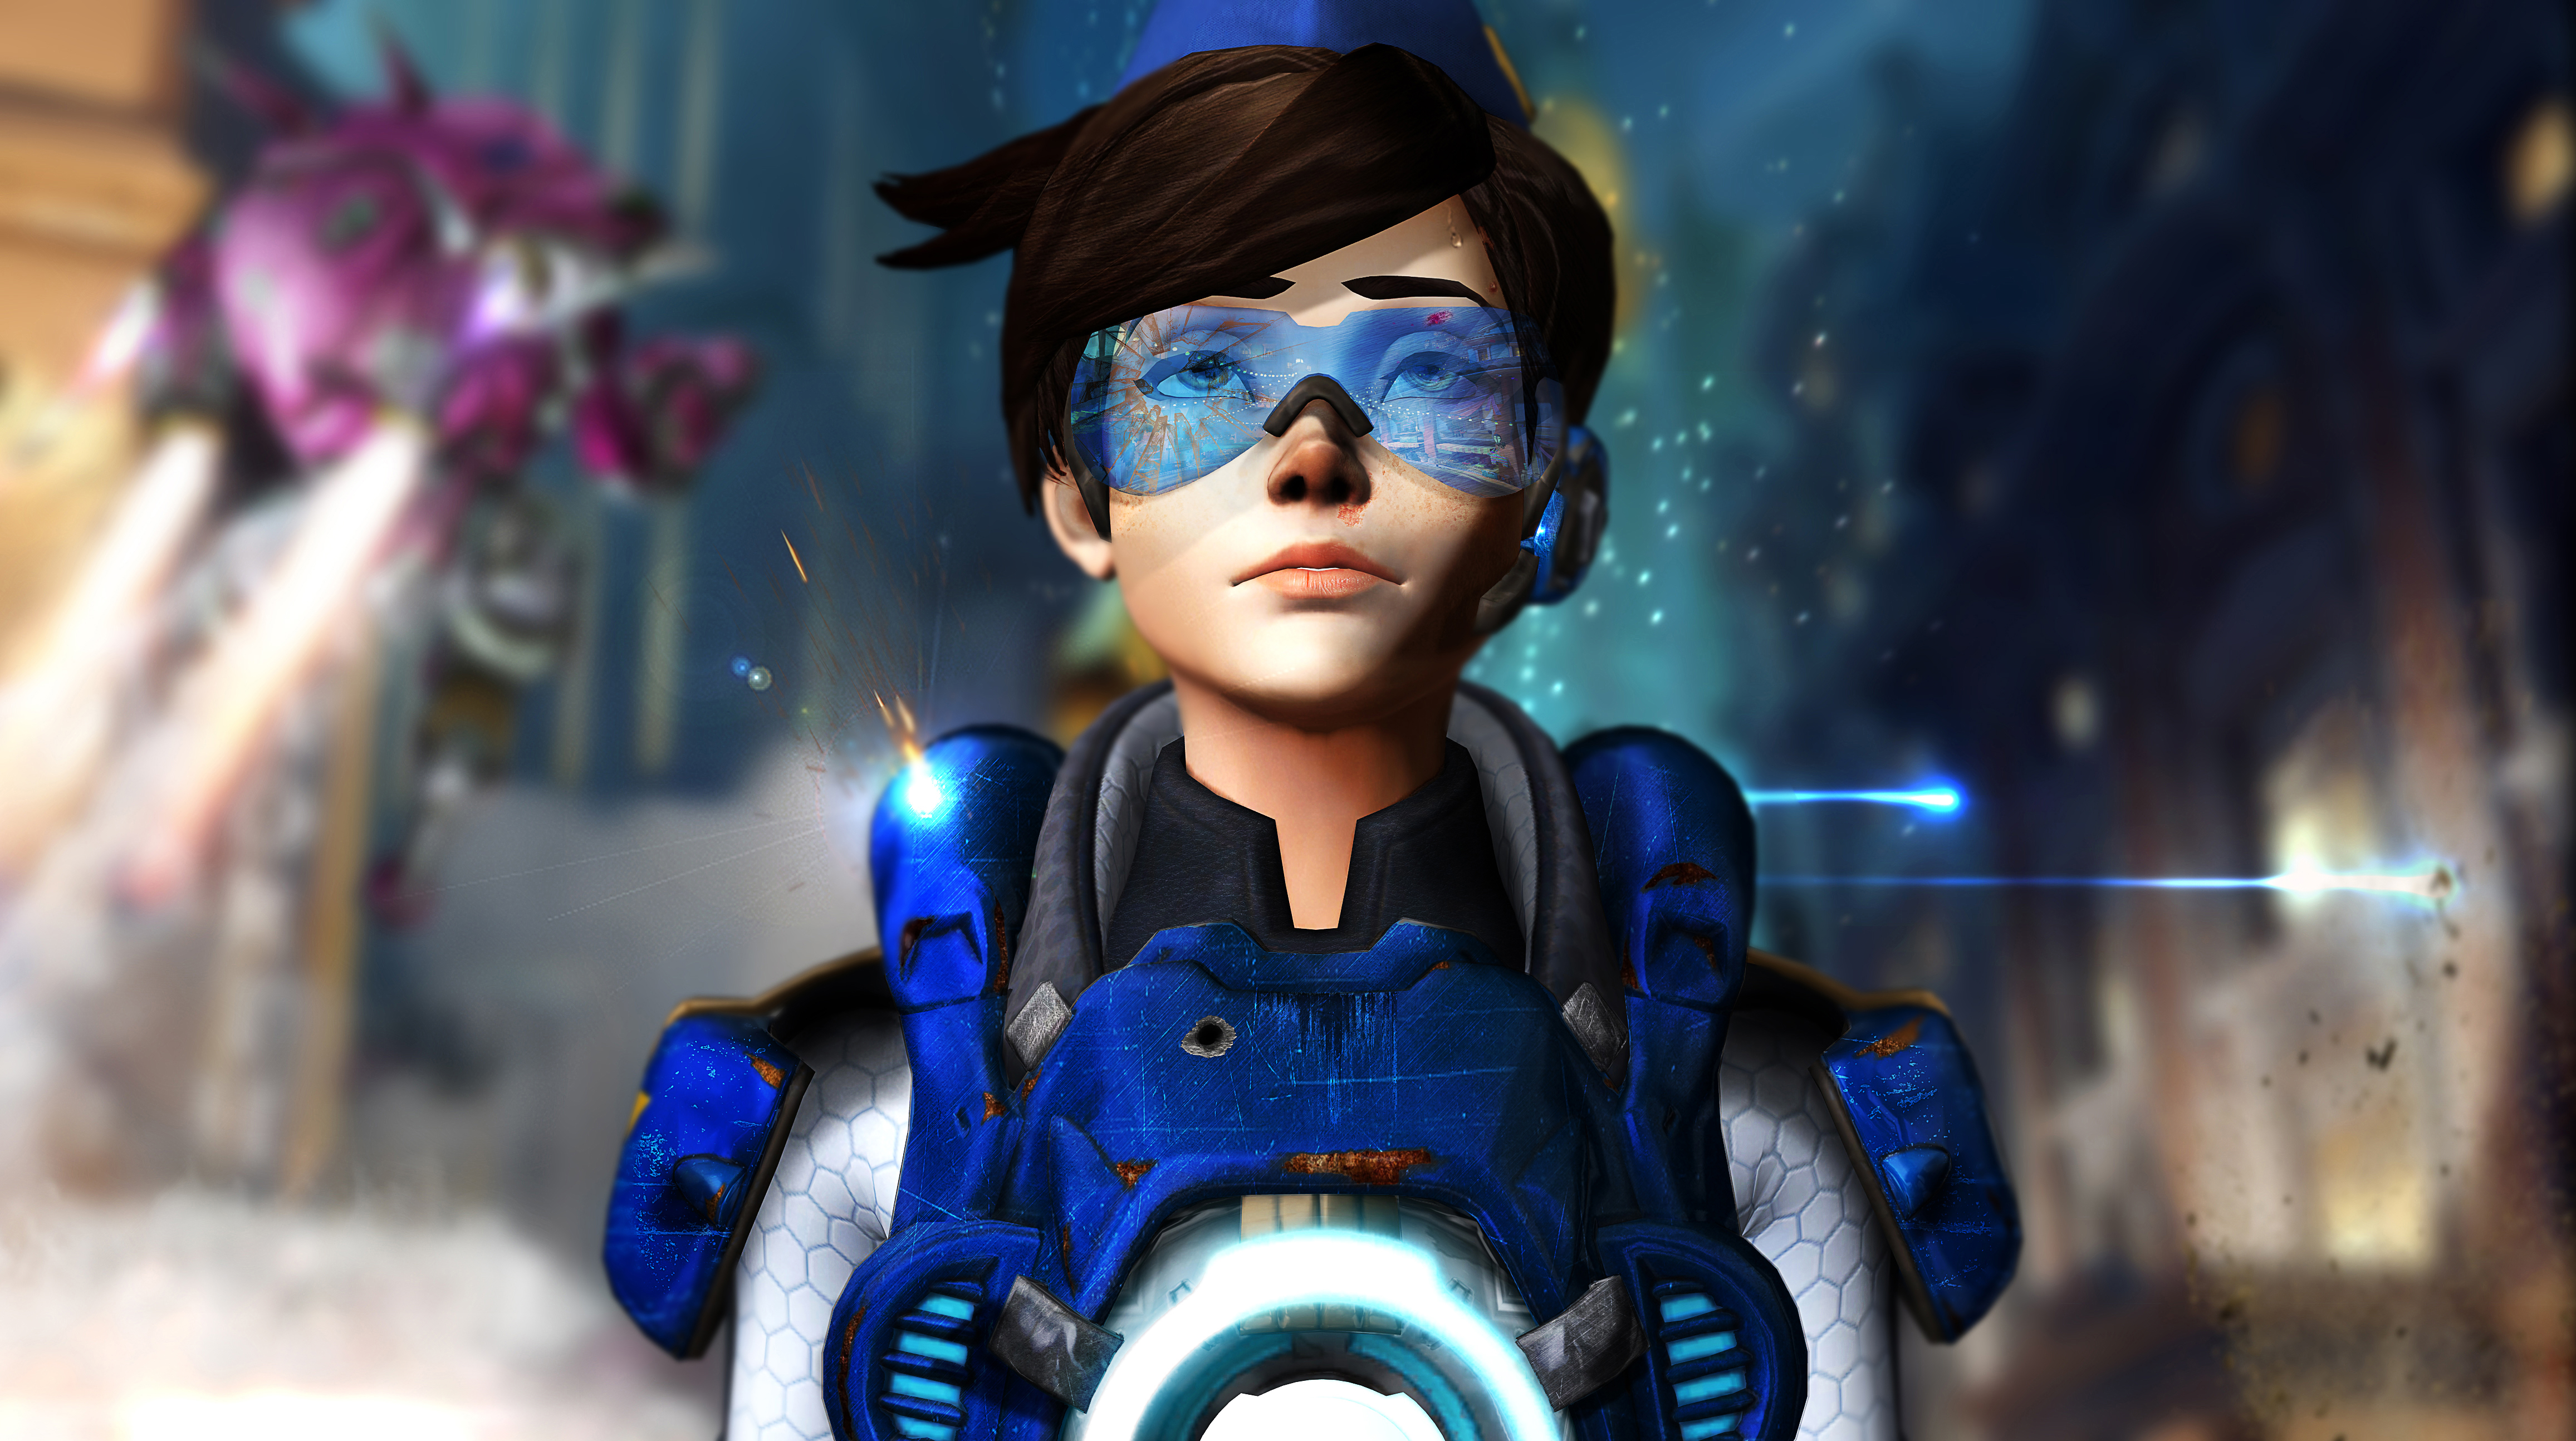 OVERWATCH Tracer Action Poses 1 by JPL-Animation on DeviantArt